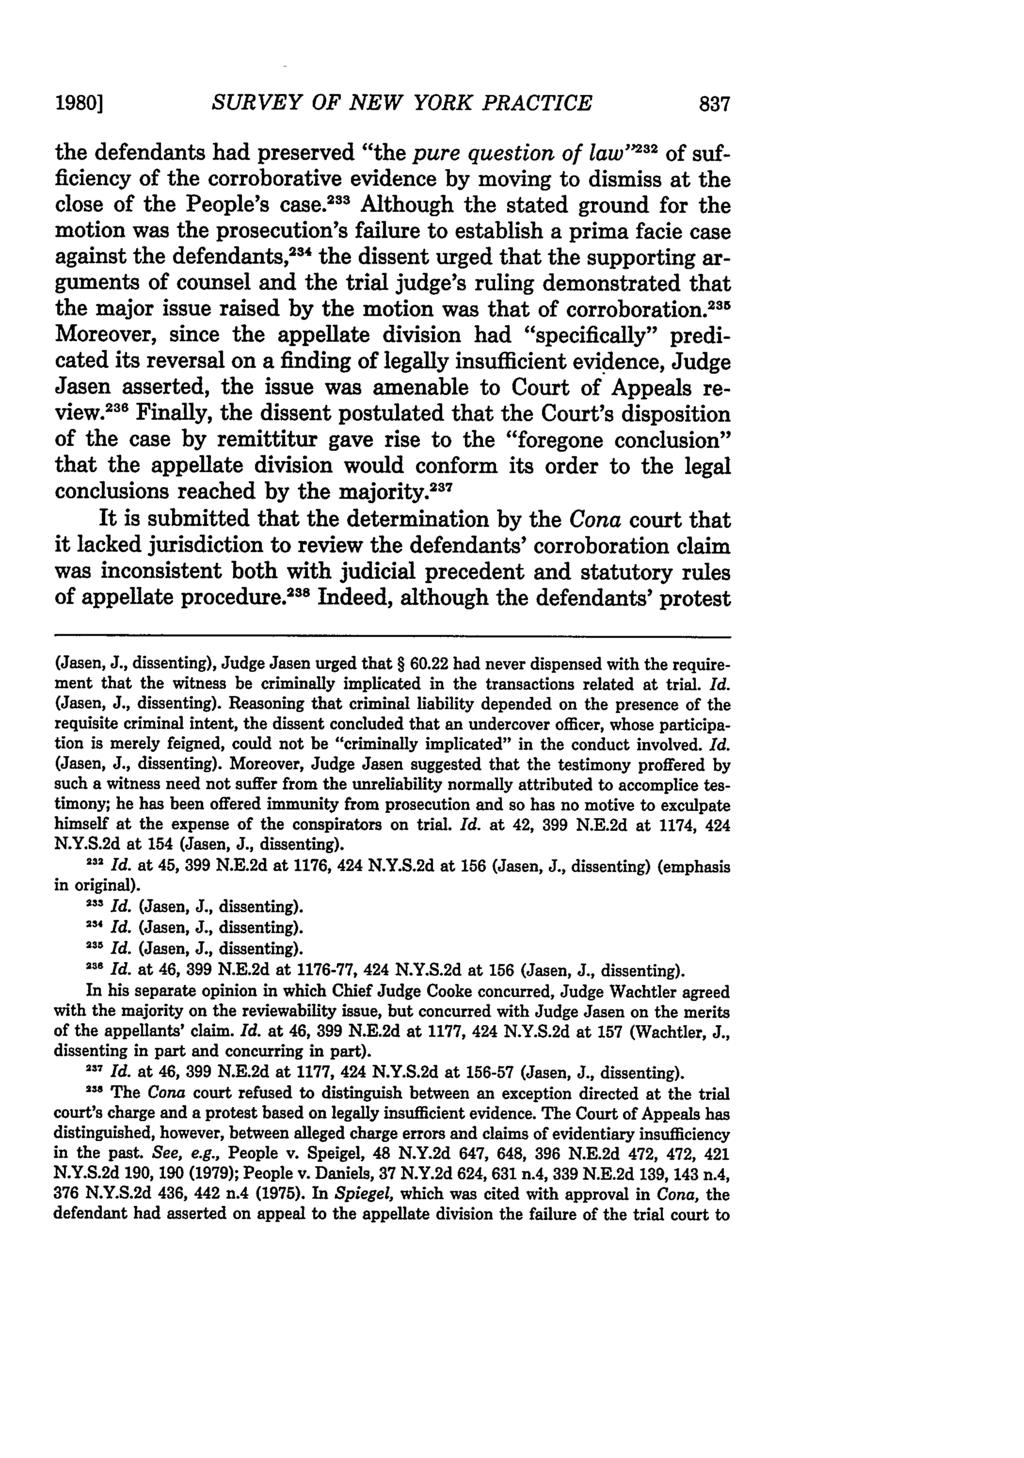 1980] SURVEY OF NEW YORK PRACTICE the defendants had preserved "the pure question of law' ' 3 2 of sufficiency of the corroborative evidence by moving to dismiss at the close of the People's case.